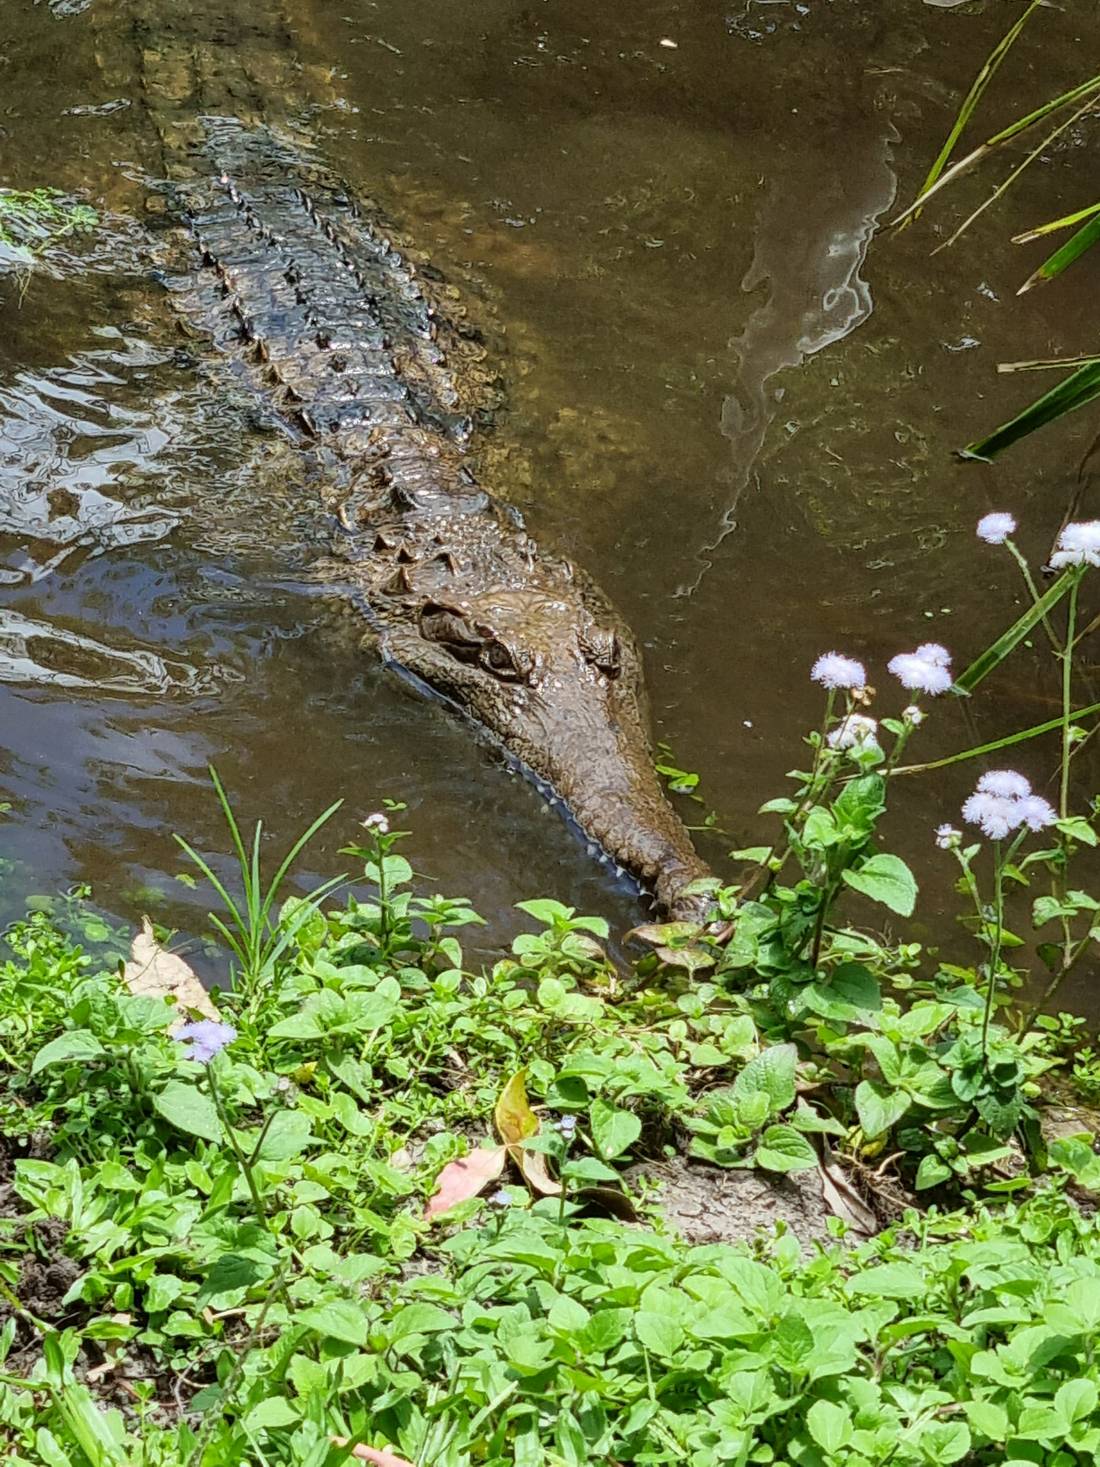 They usually have a few Saltwater Crocs at this park but they are currently upgrading their enclosure and so the crocs are staying at Australia Zoo for a while.